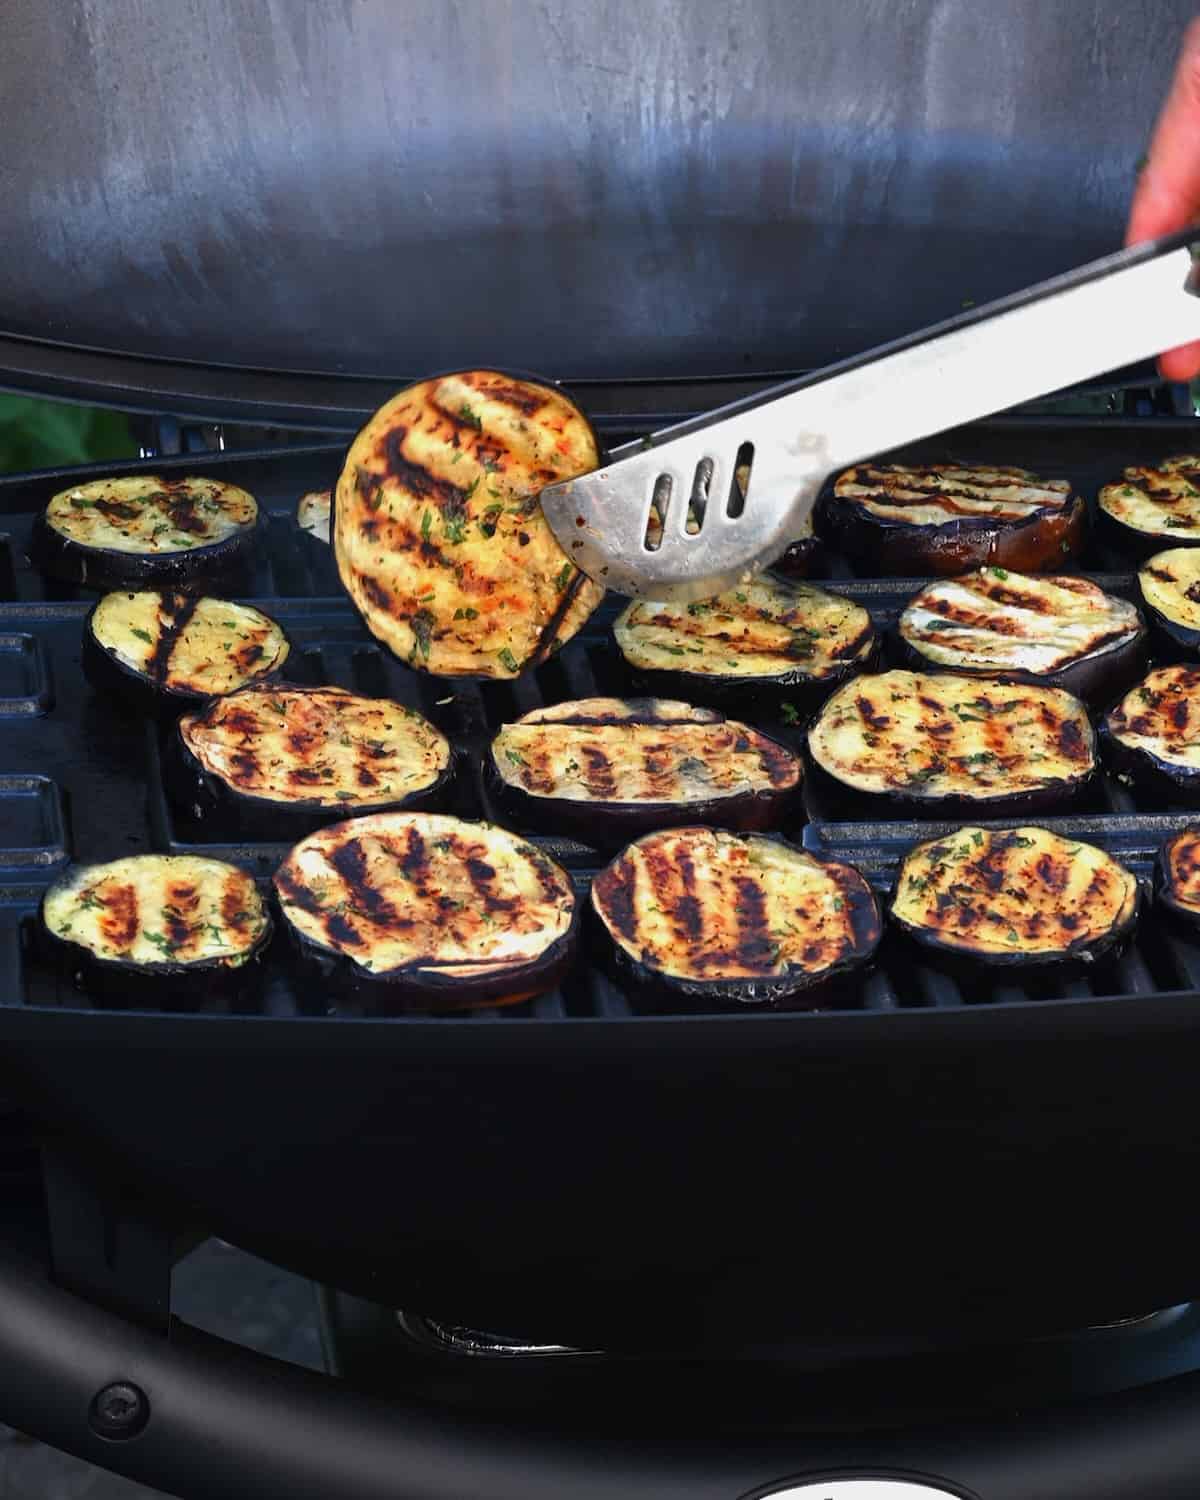 Removing cooked eggplant slice from the grill